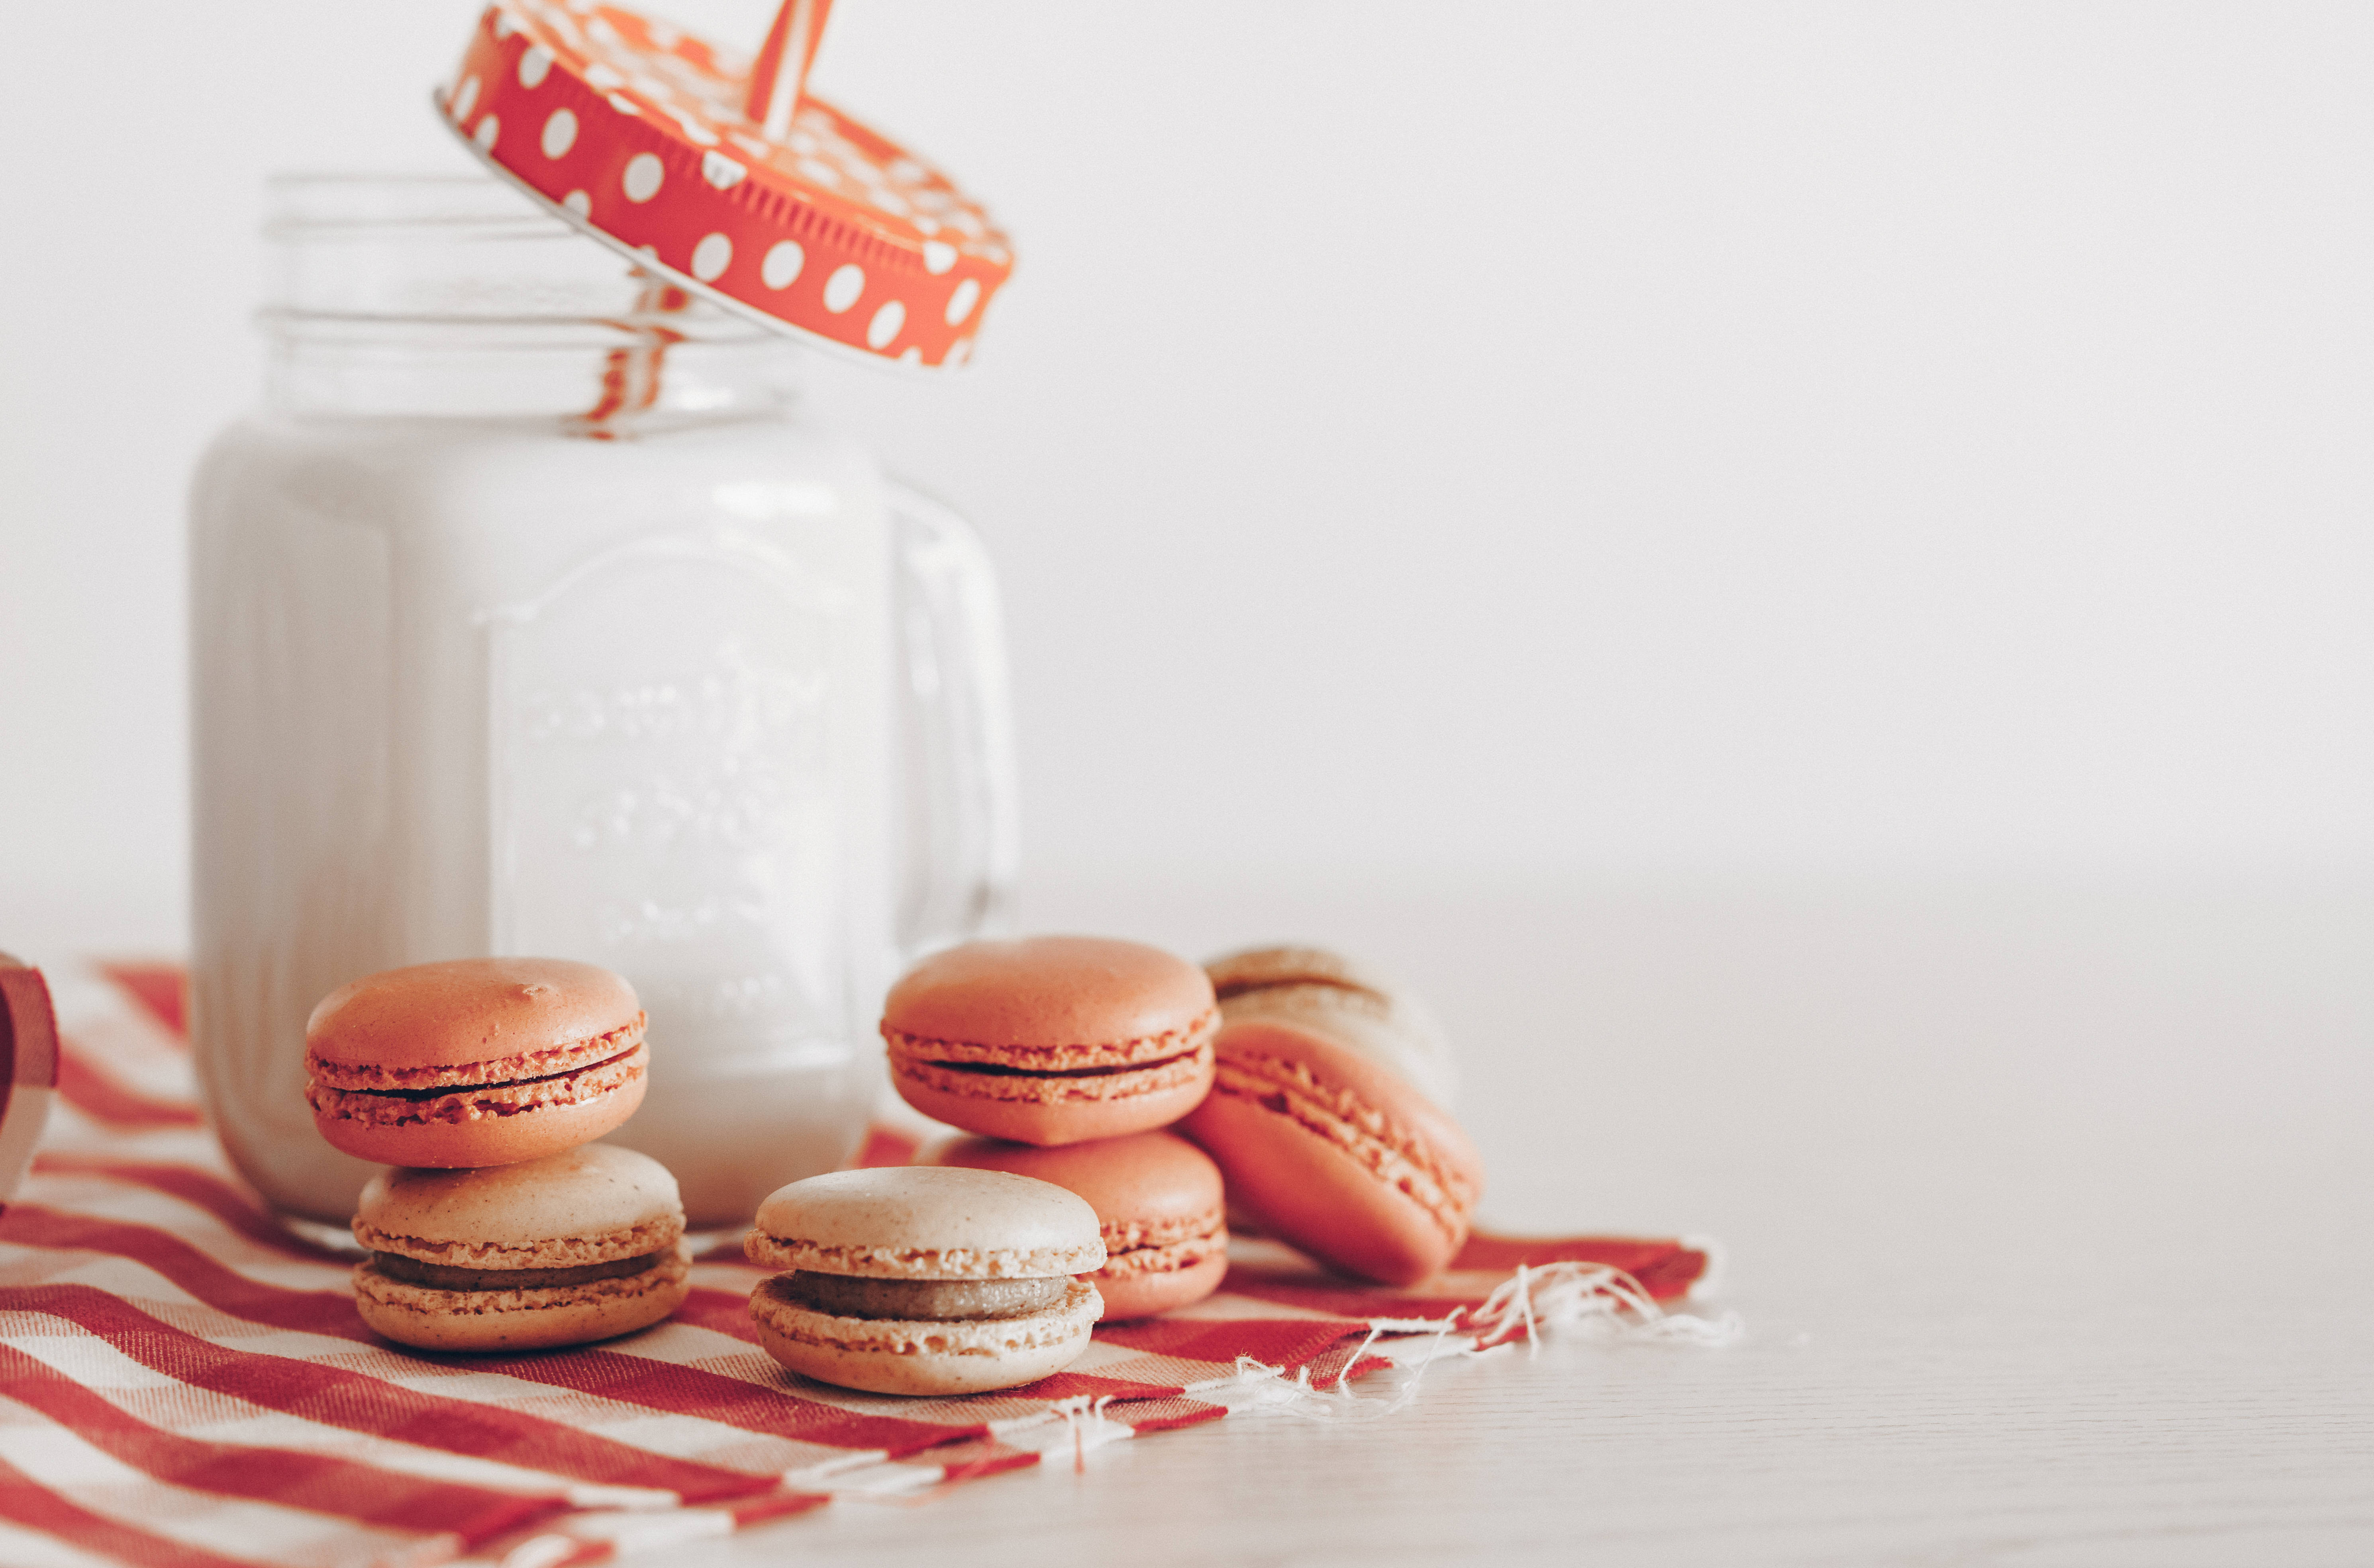 Macarons and a glass of milk on a table - Milk, macarons